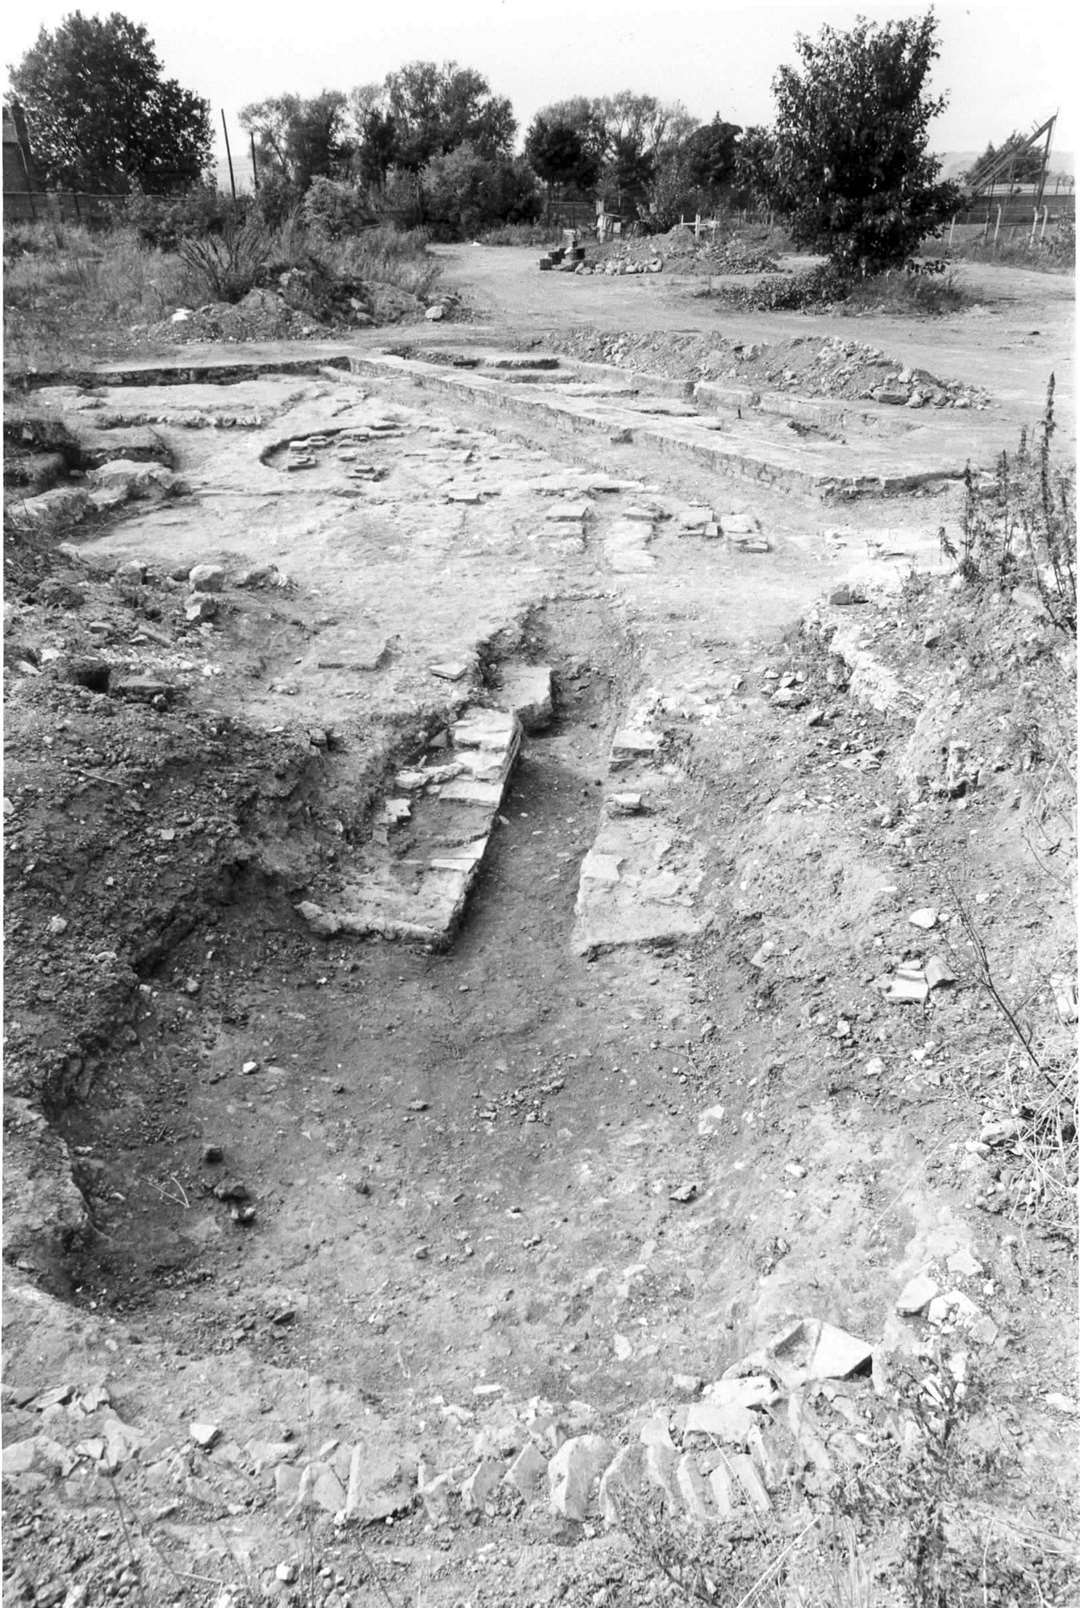 Roman Villa site at Snodland in 1985, now part of a housing development off Church Field, 200m north of All Saints Church